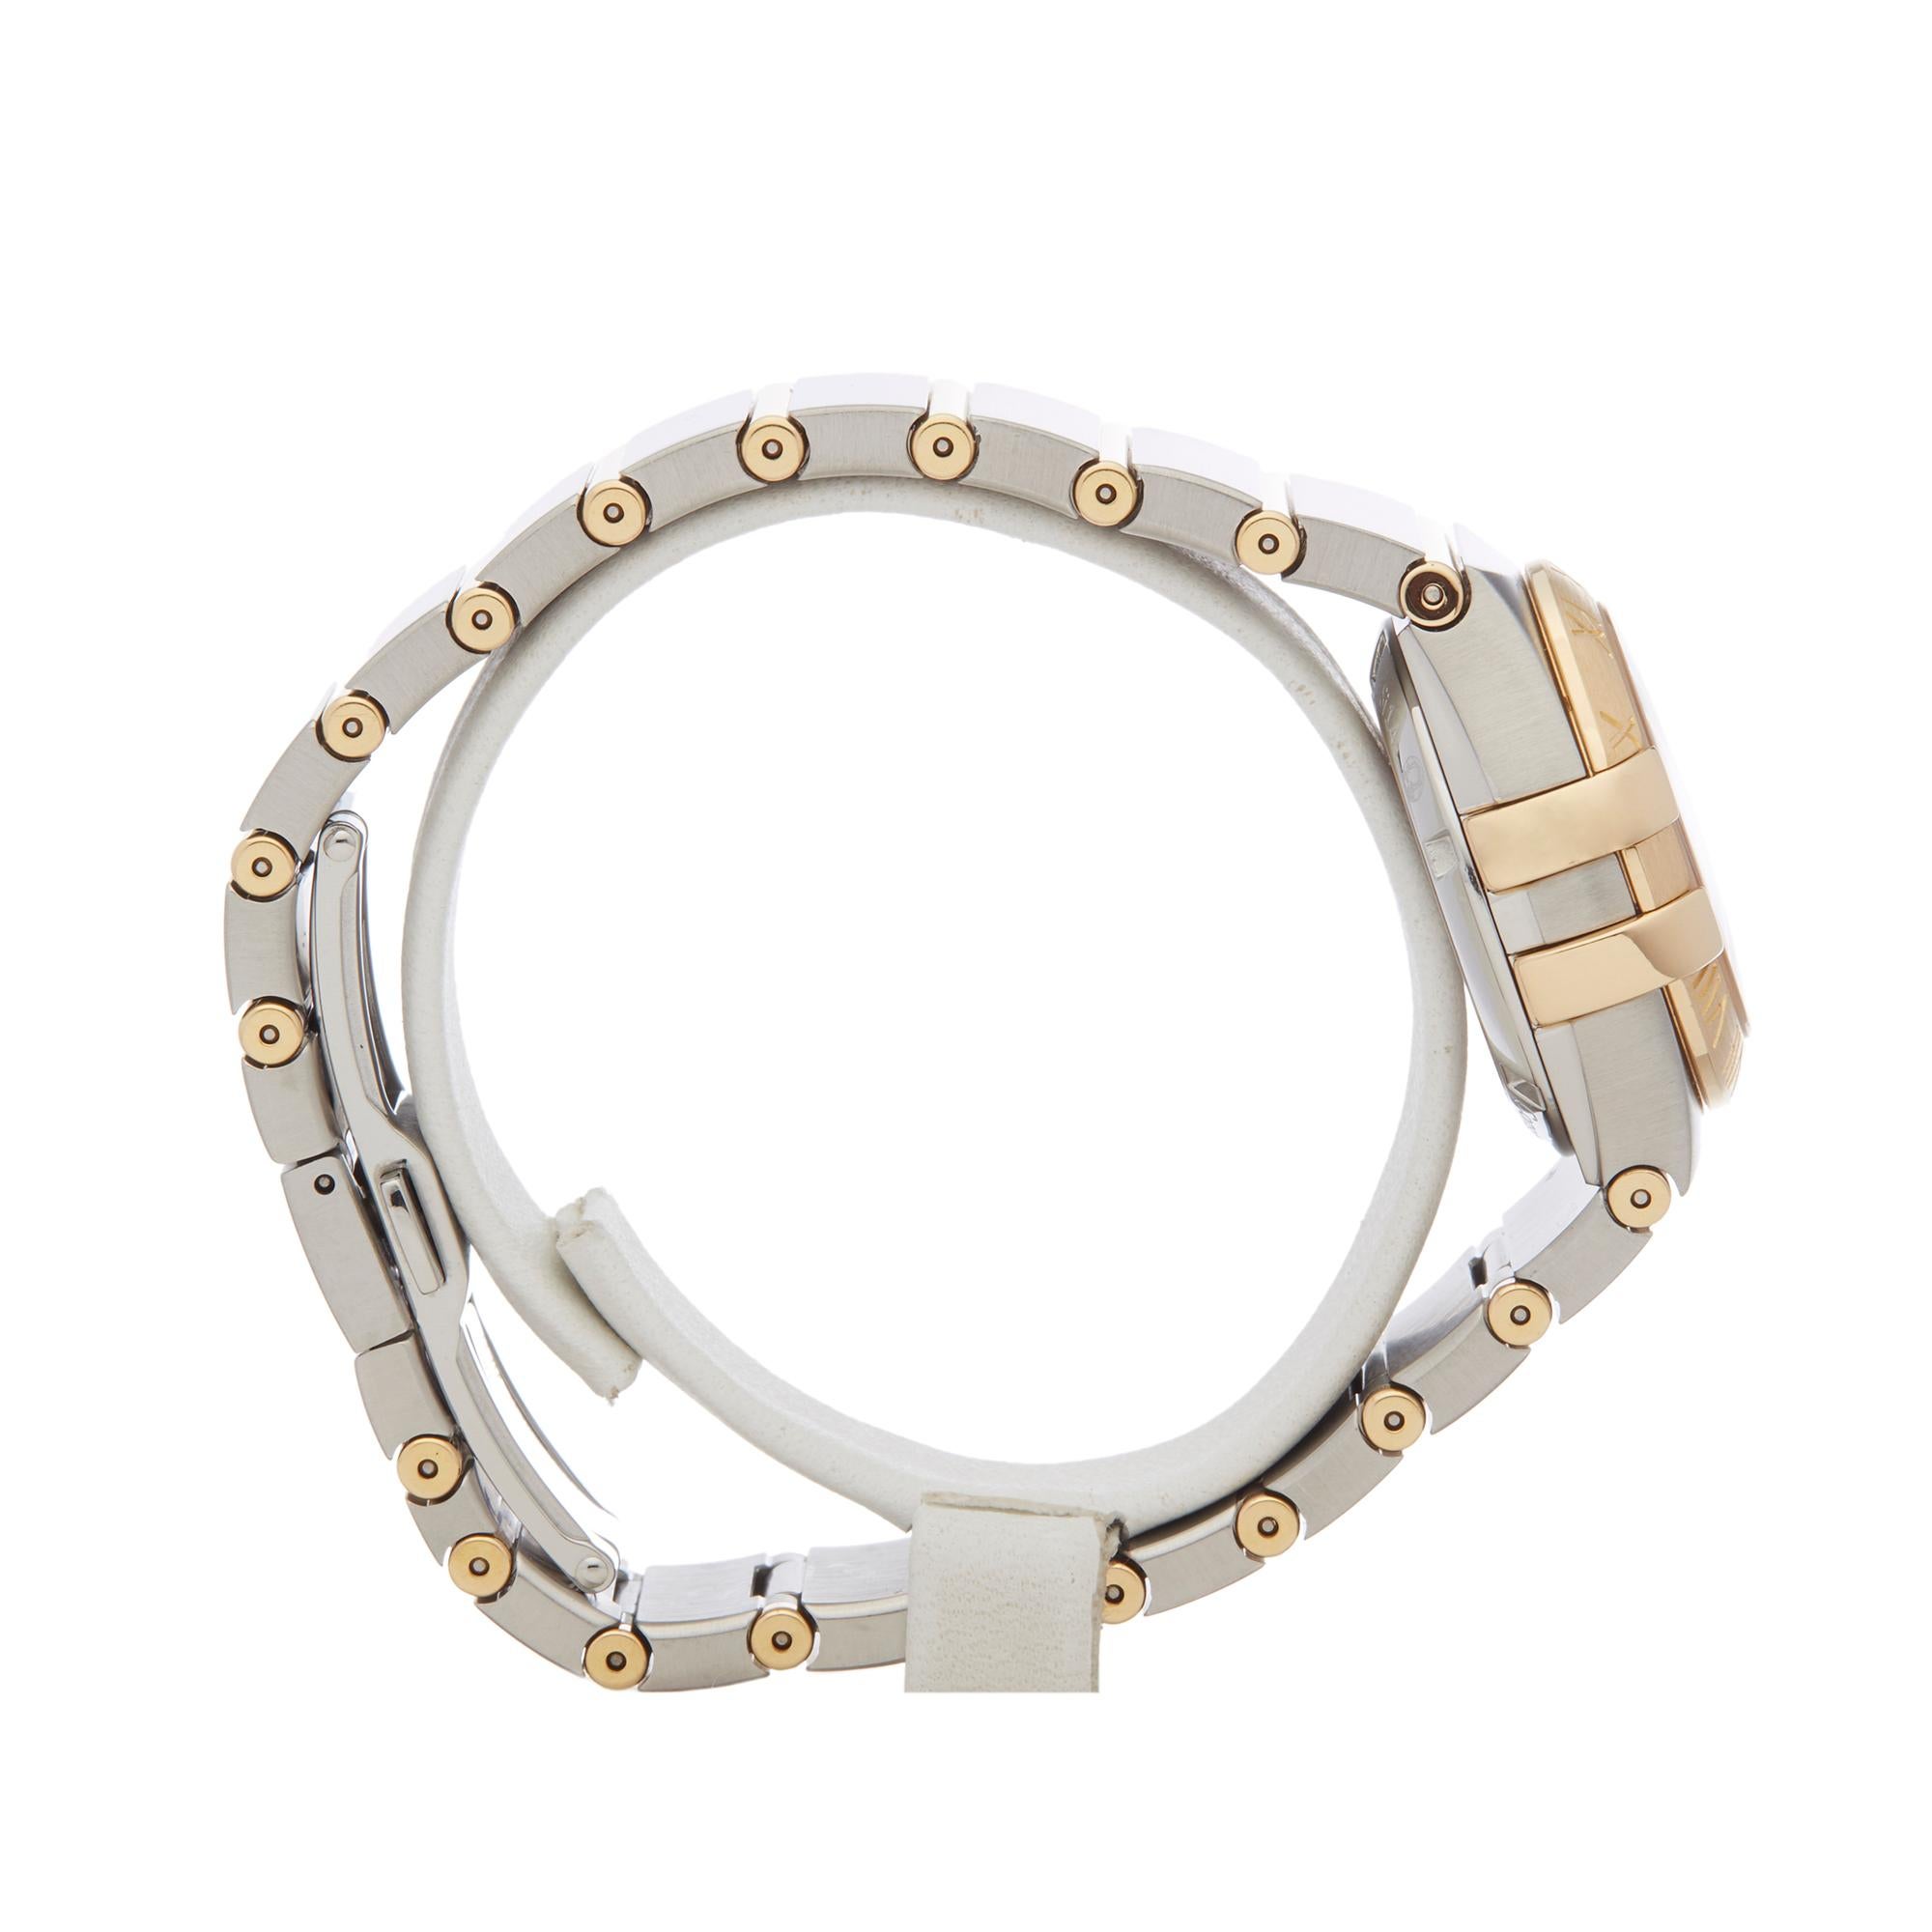 Women's Omega Constellation Diamond Stainless Steel and Yellow Gold 123.20.27.20.57.002